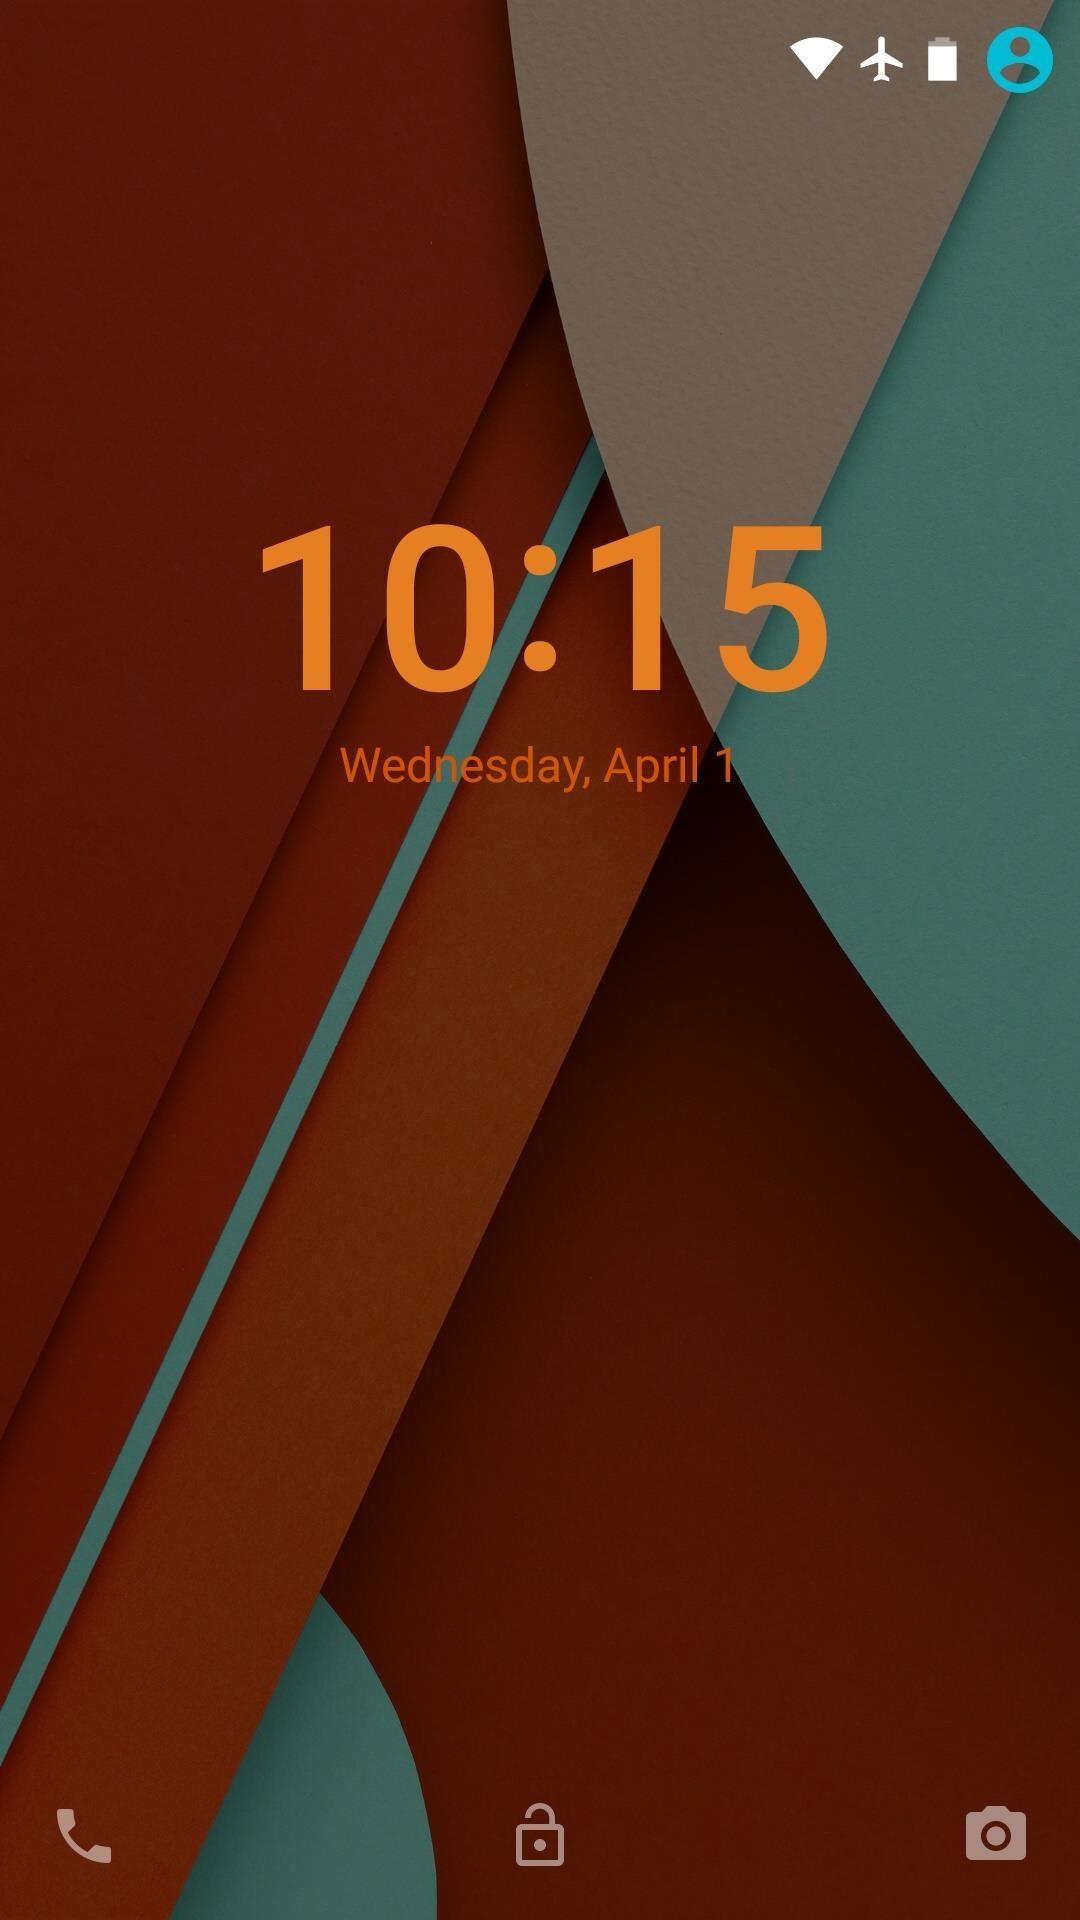 How to Theme Your Lock Screen on Android Lollipop